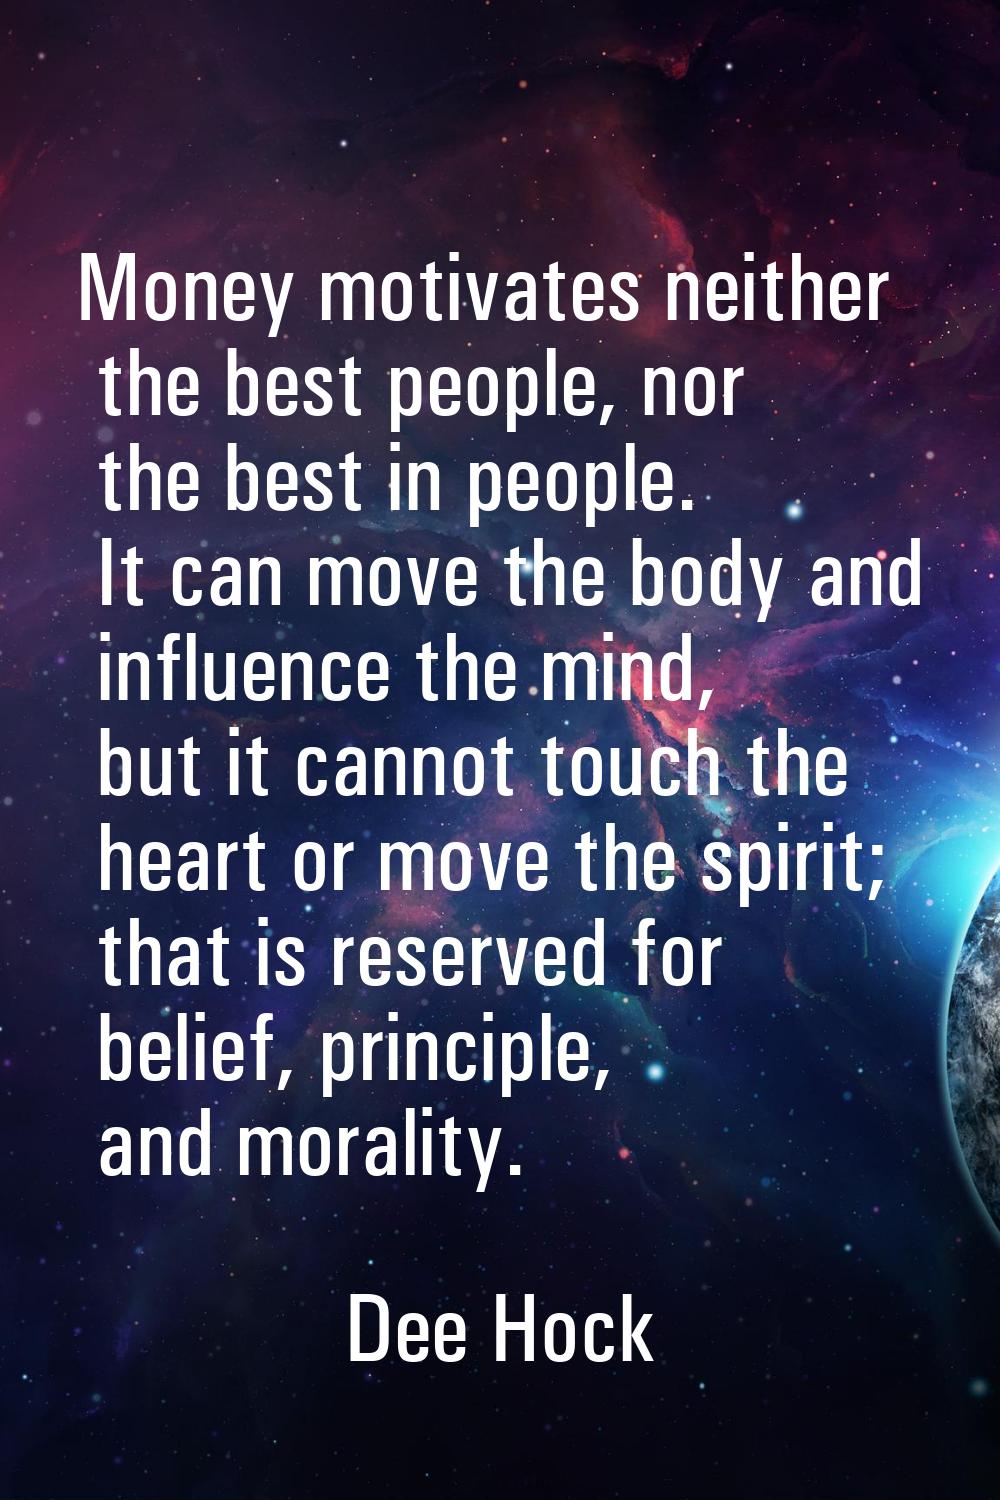 Money motivates neither the best people, nor the best in people. It can move the body and influence